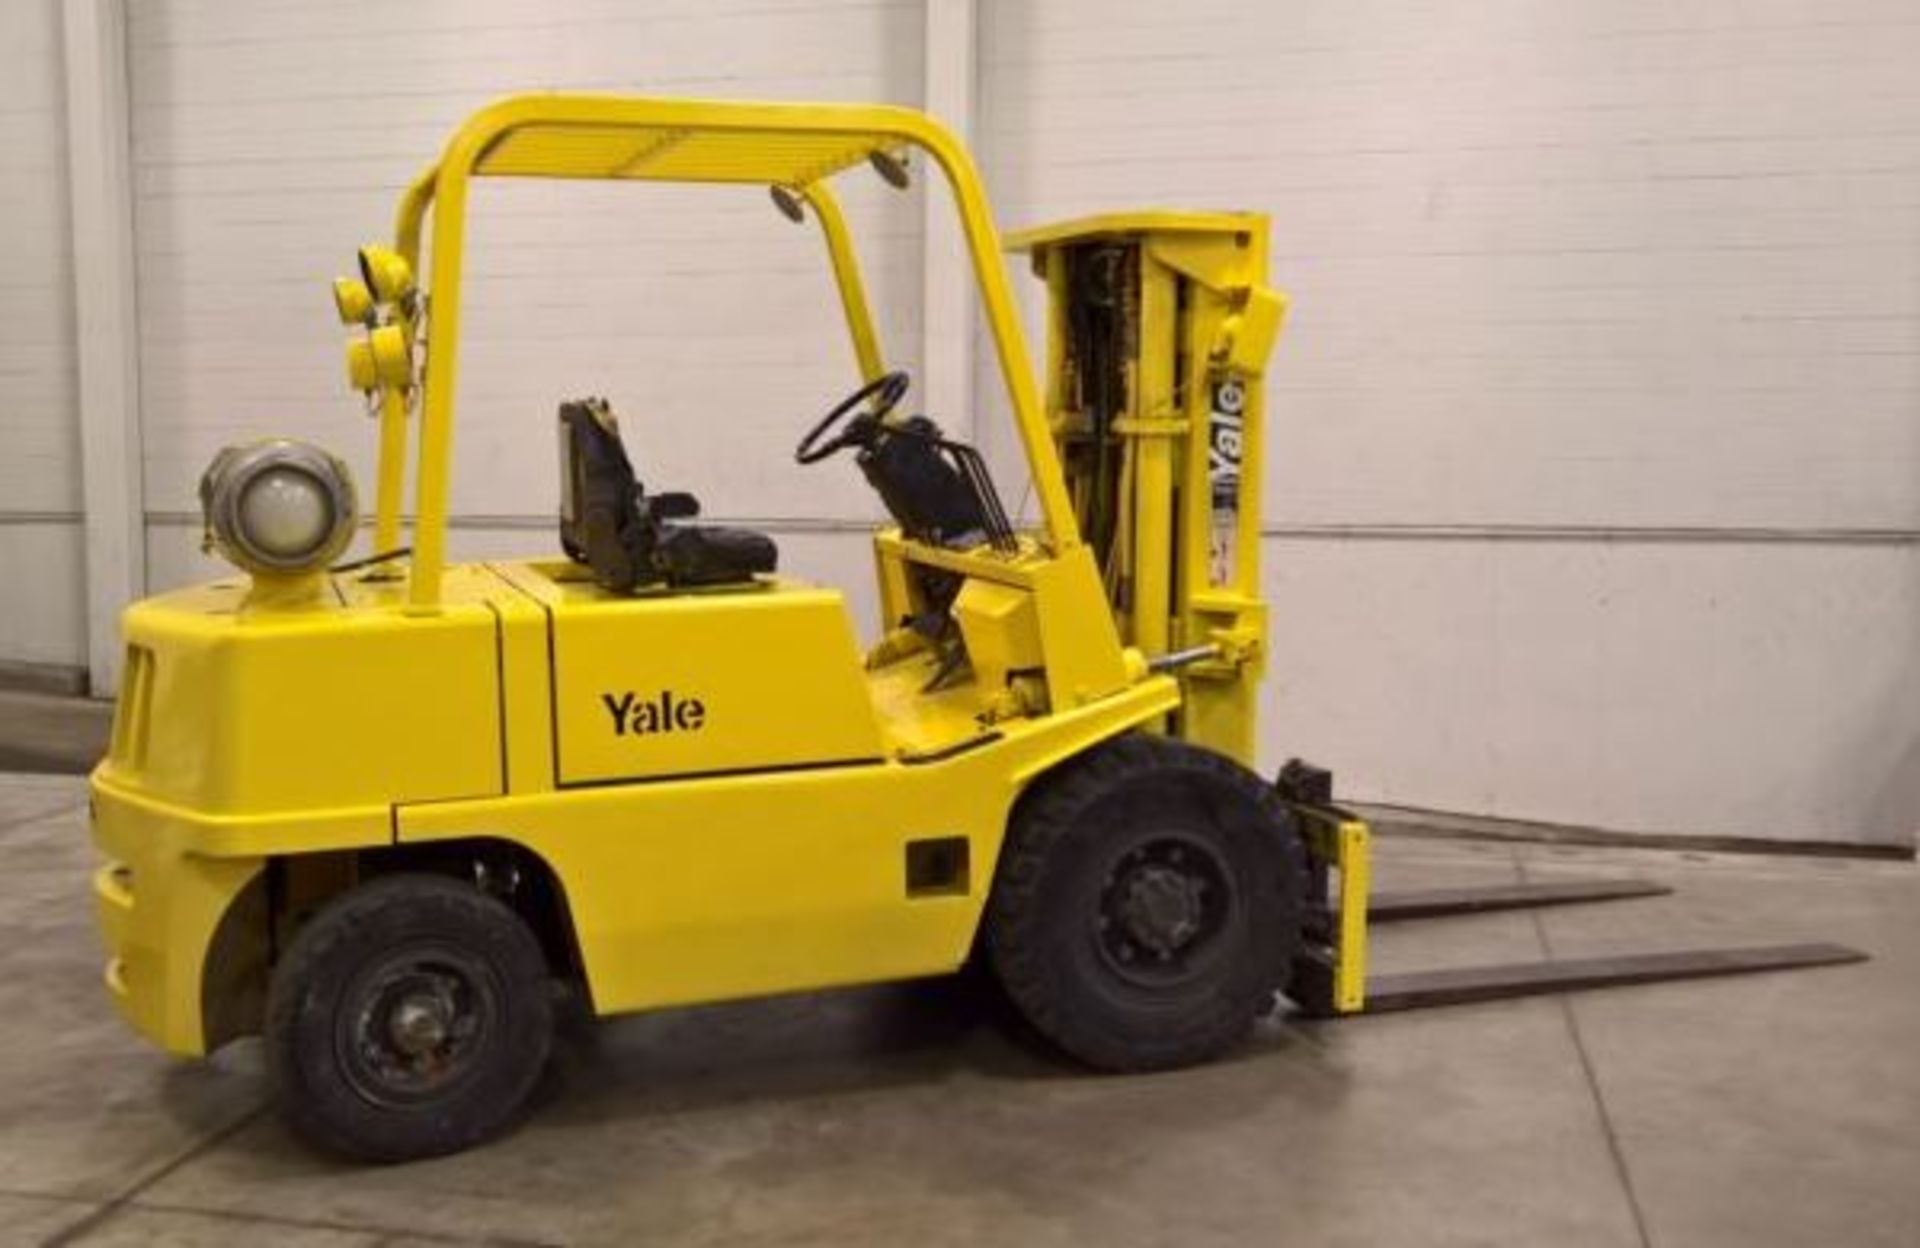 YALE MDL. GLP080LCNSBE083 (LPG) FORK TRUCK, 8000# MAX LIFTING CAPACITY, 170” MAX LIFT HEIGHT - Image 3 of 8